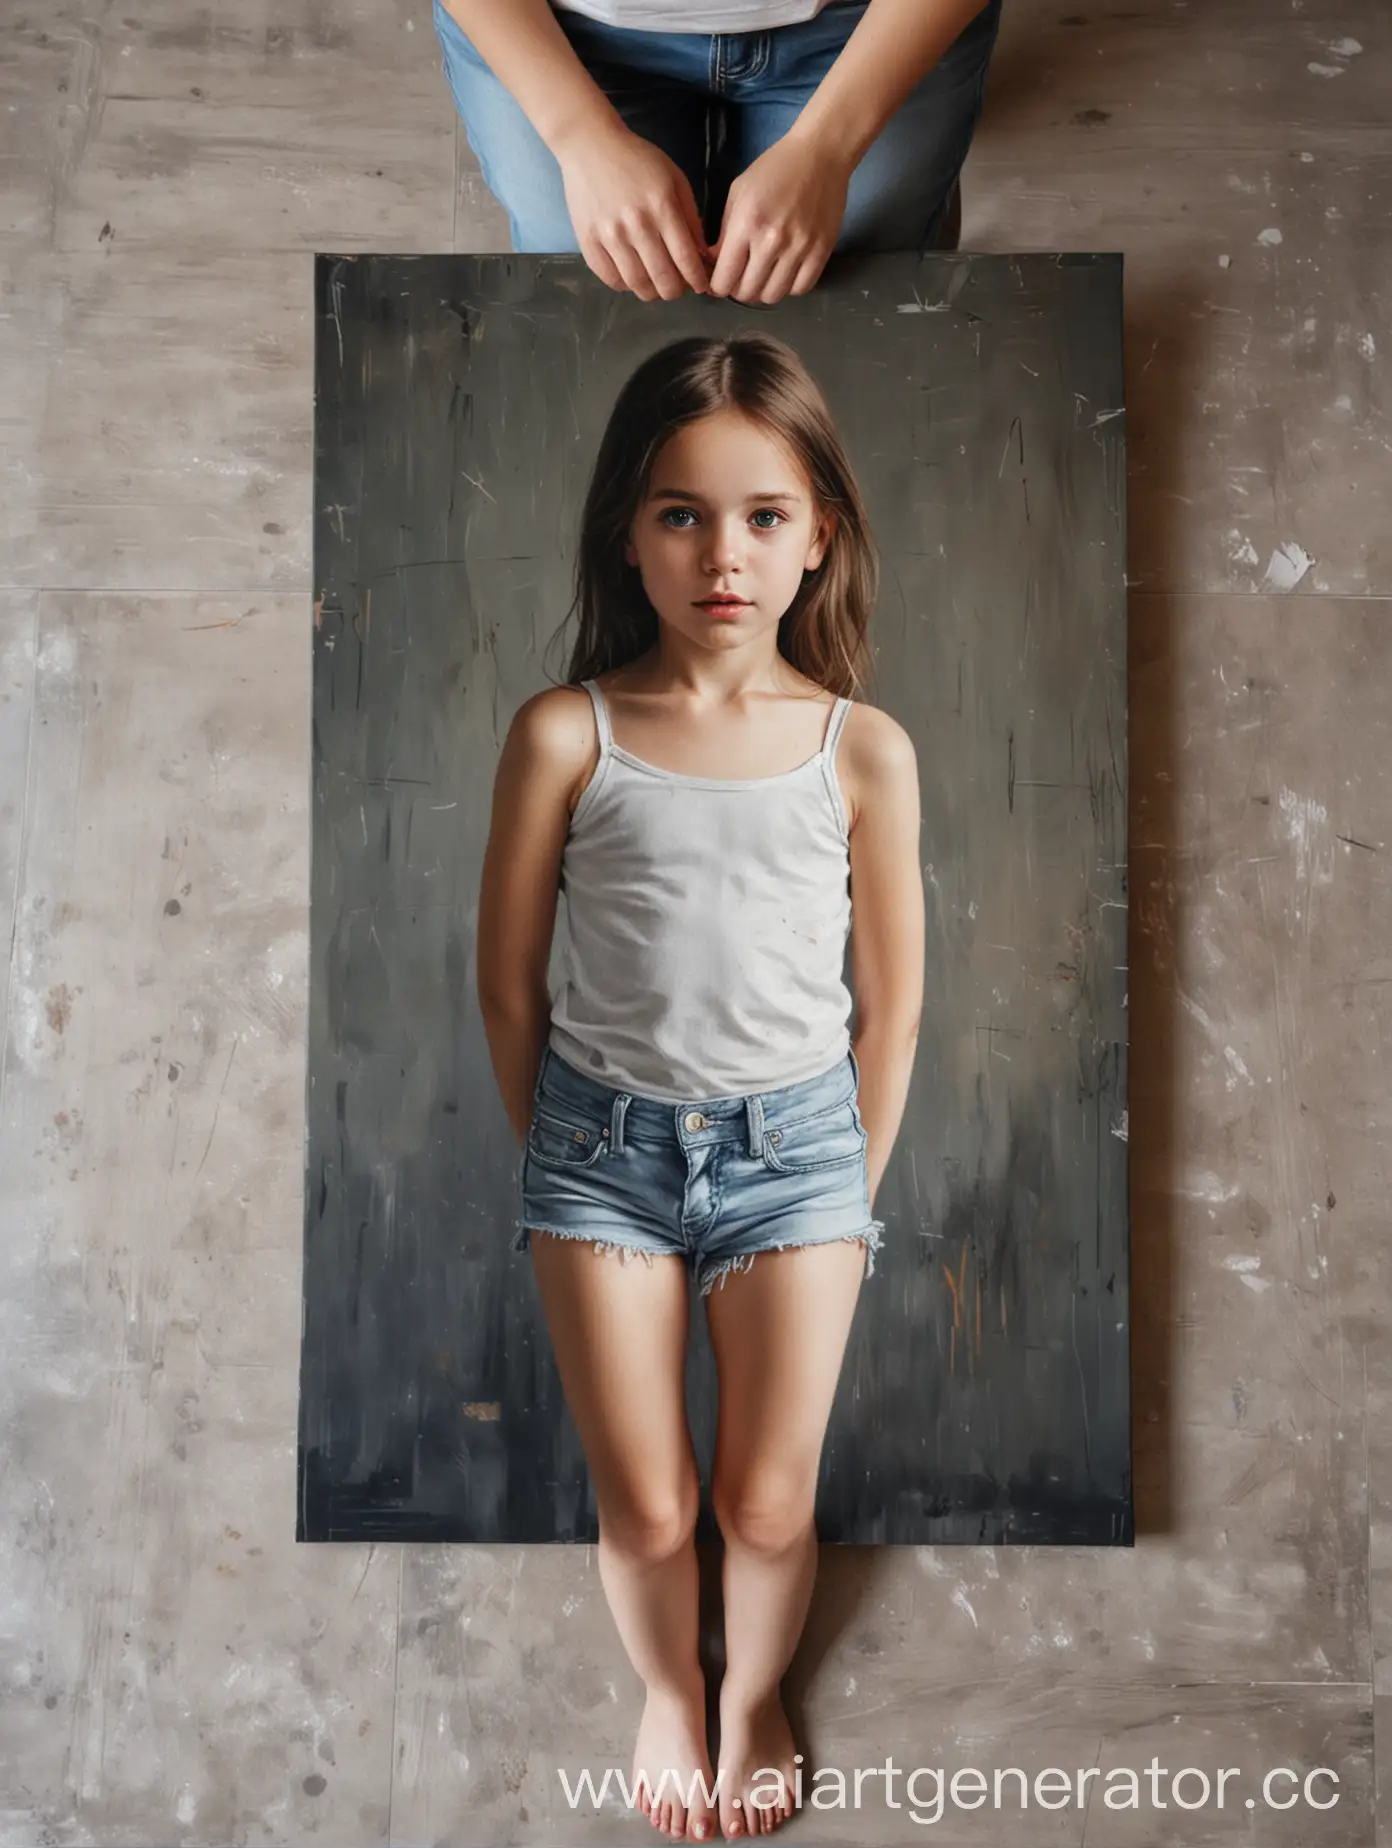 A portrait on canvas measuring 50x70 centimeters stands on the floor, which is held in the hands of a beautiful slender girl